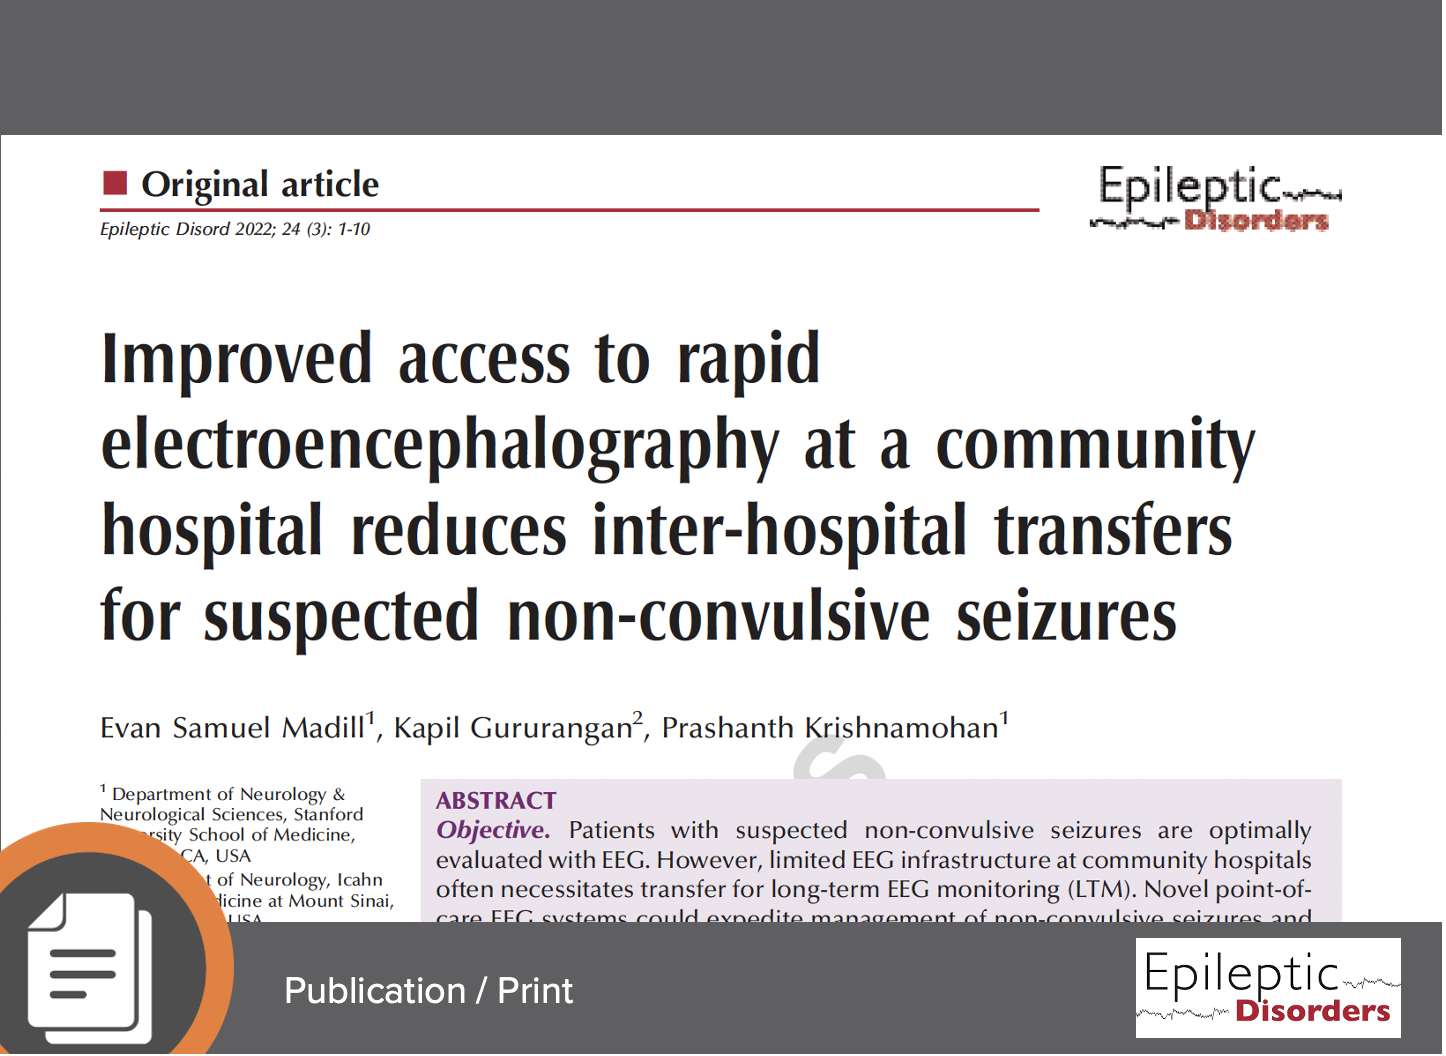 Improved access to rapid electroencephalography at a community hospital reduces inter-hospital transfers for suspected non-convulsive seizures